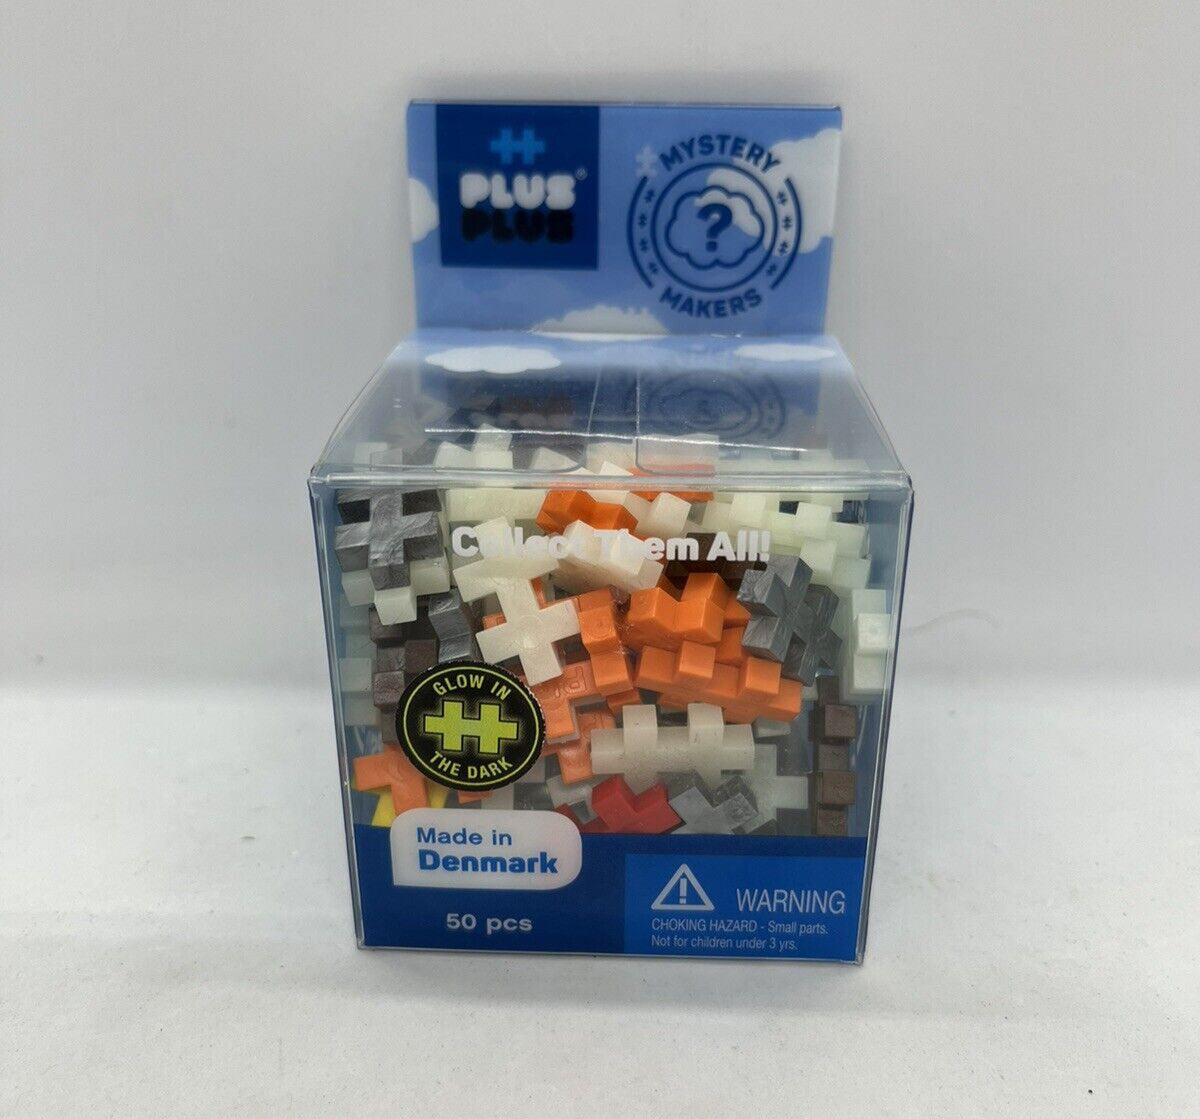 PLUS PLUS – Mystery Makers (Glow in the Dark) – Series 1 - 50 pieces